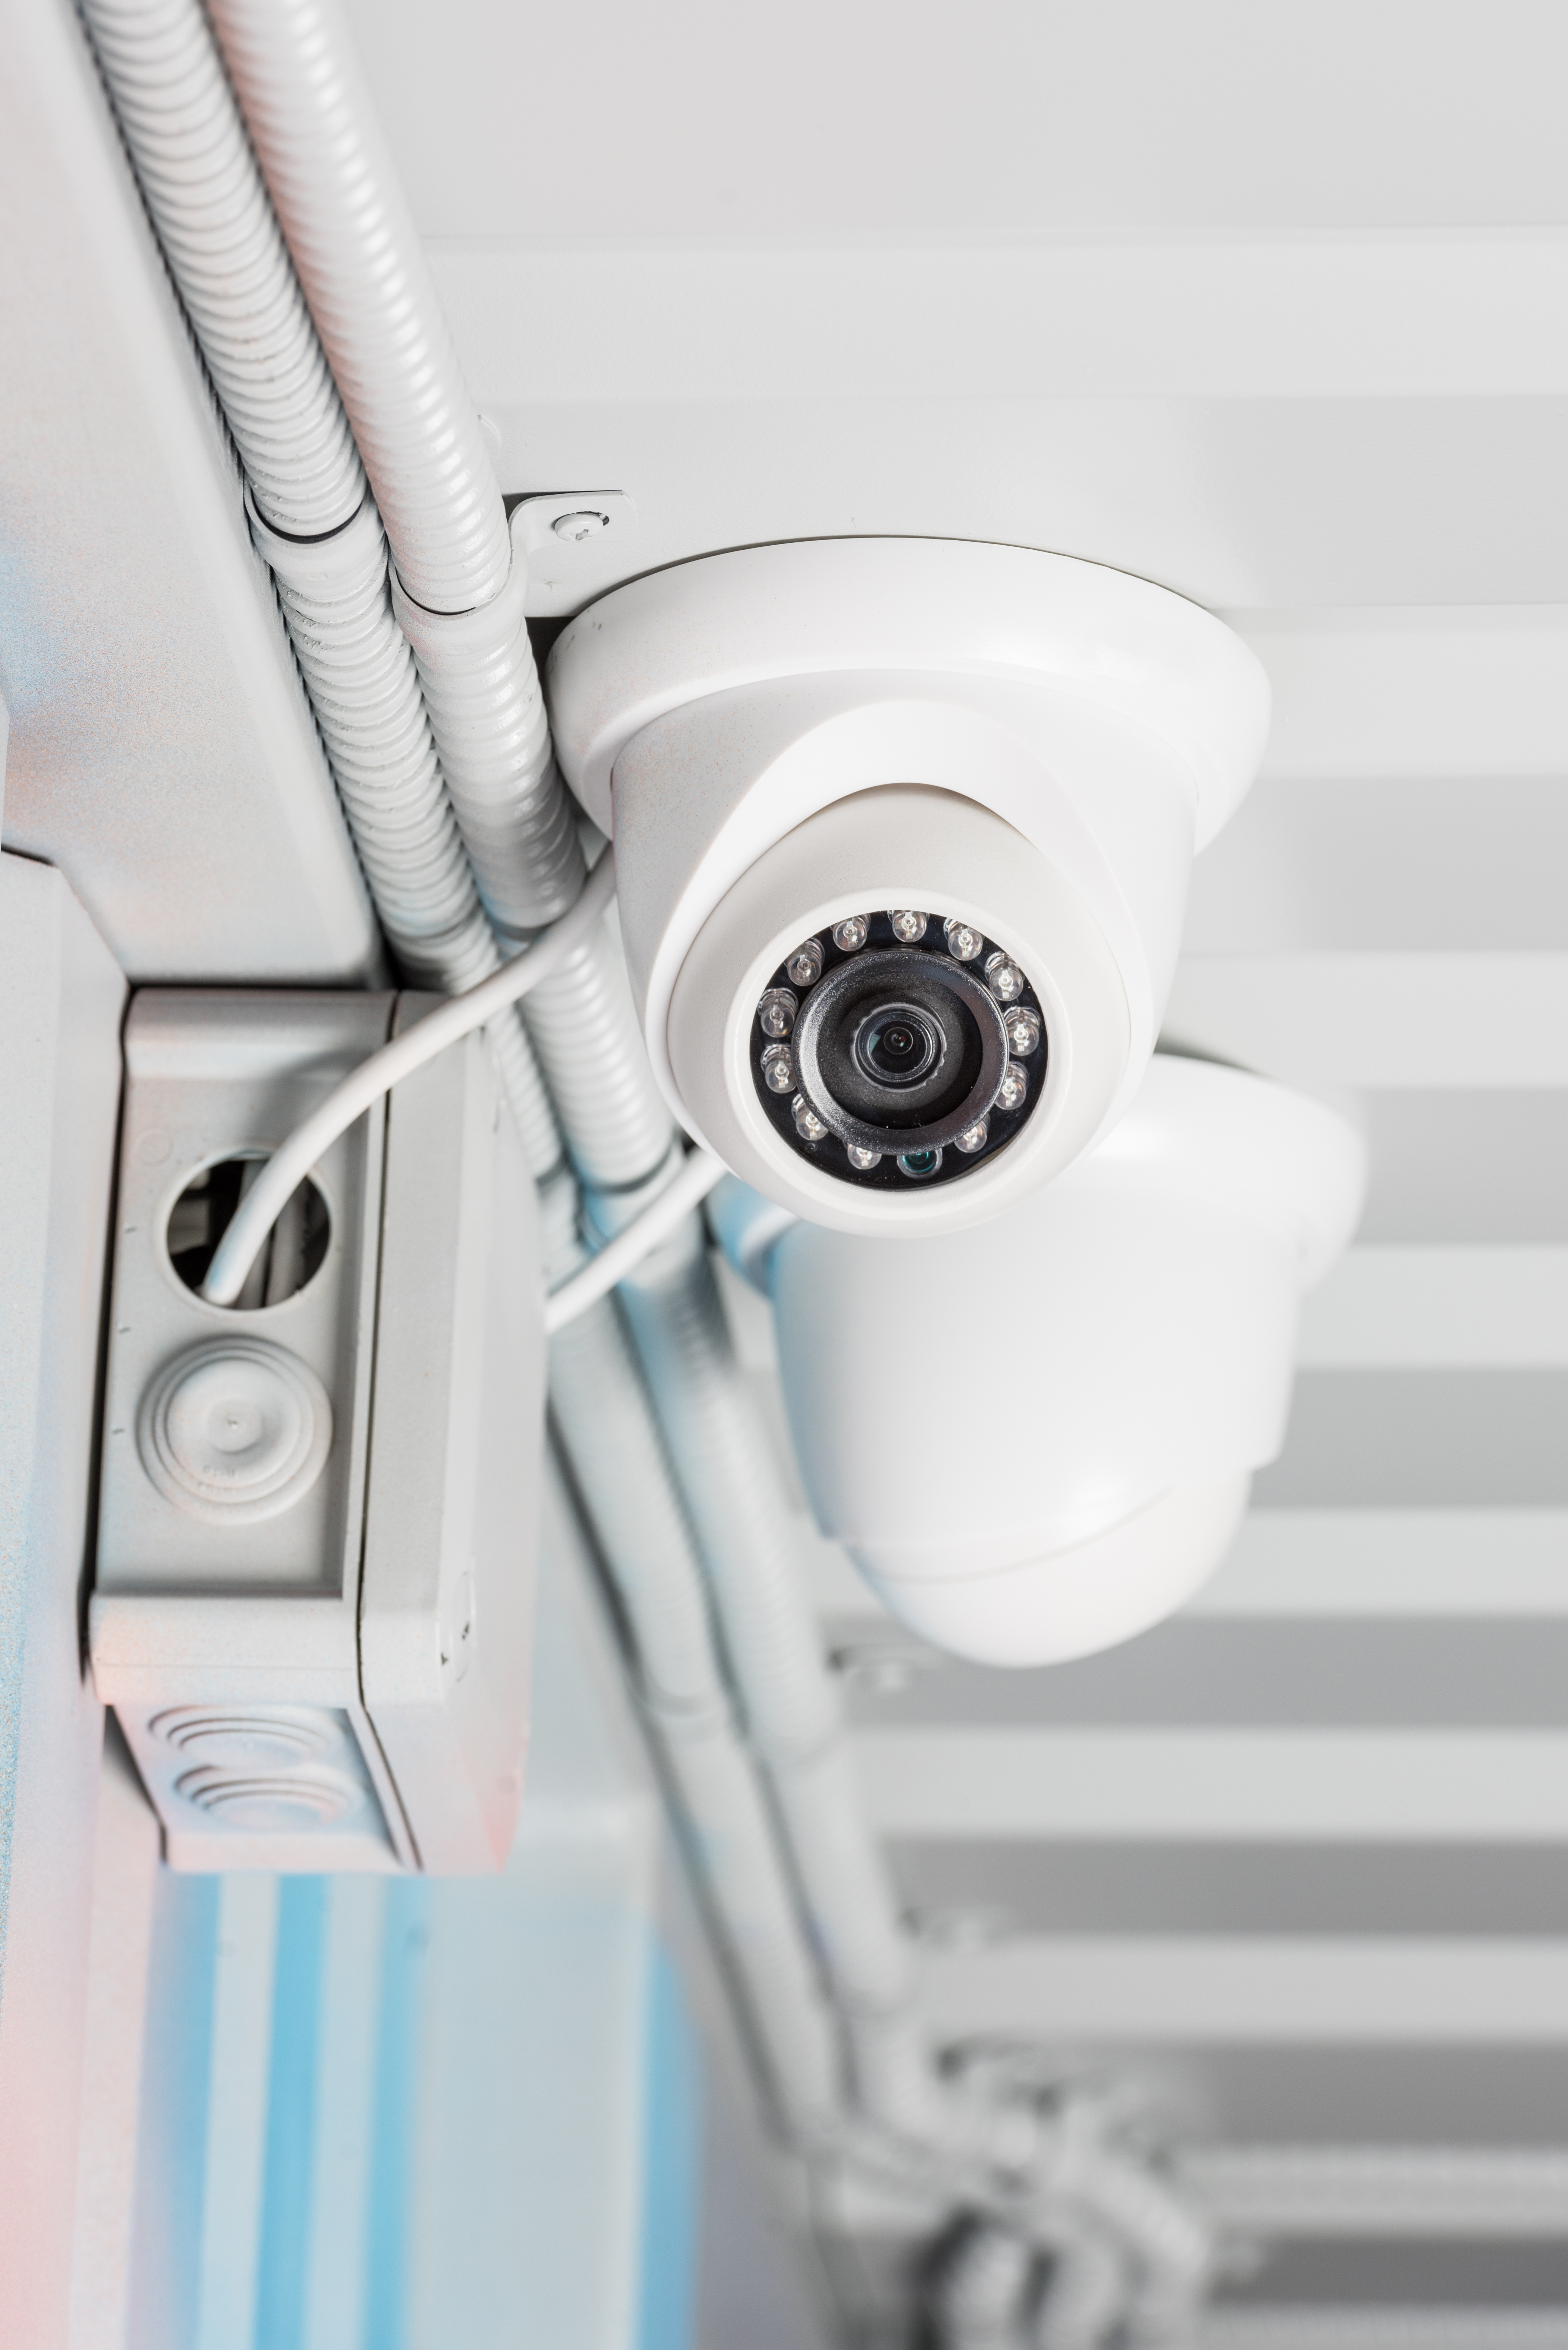 Ring Monitored Home Security Systems | Protect Your Property